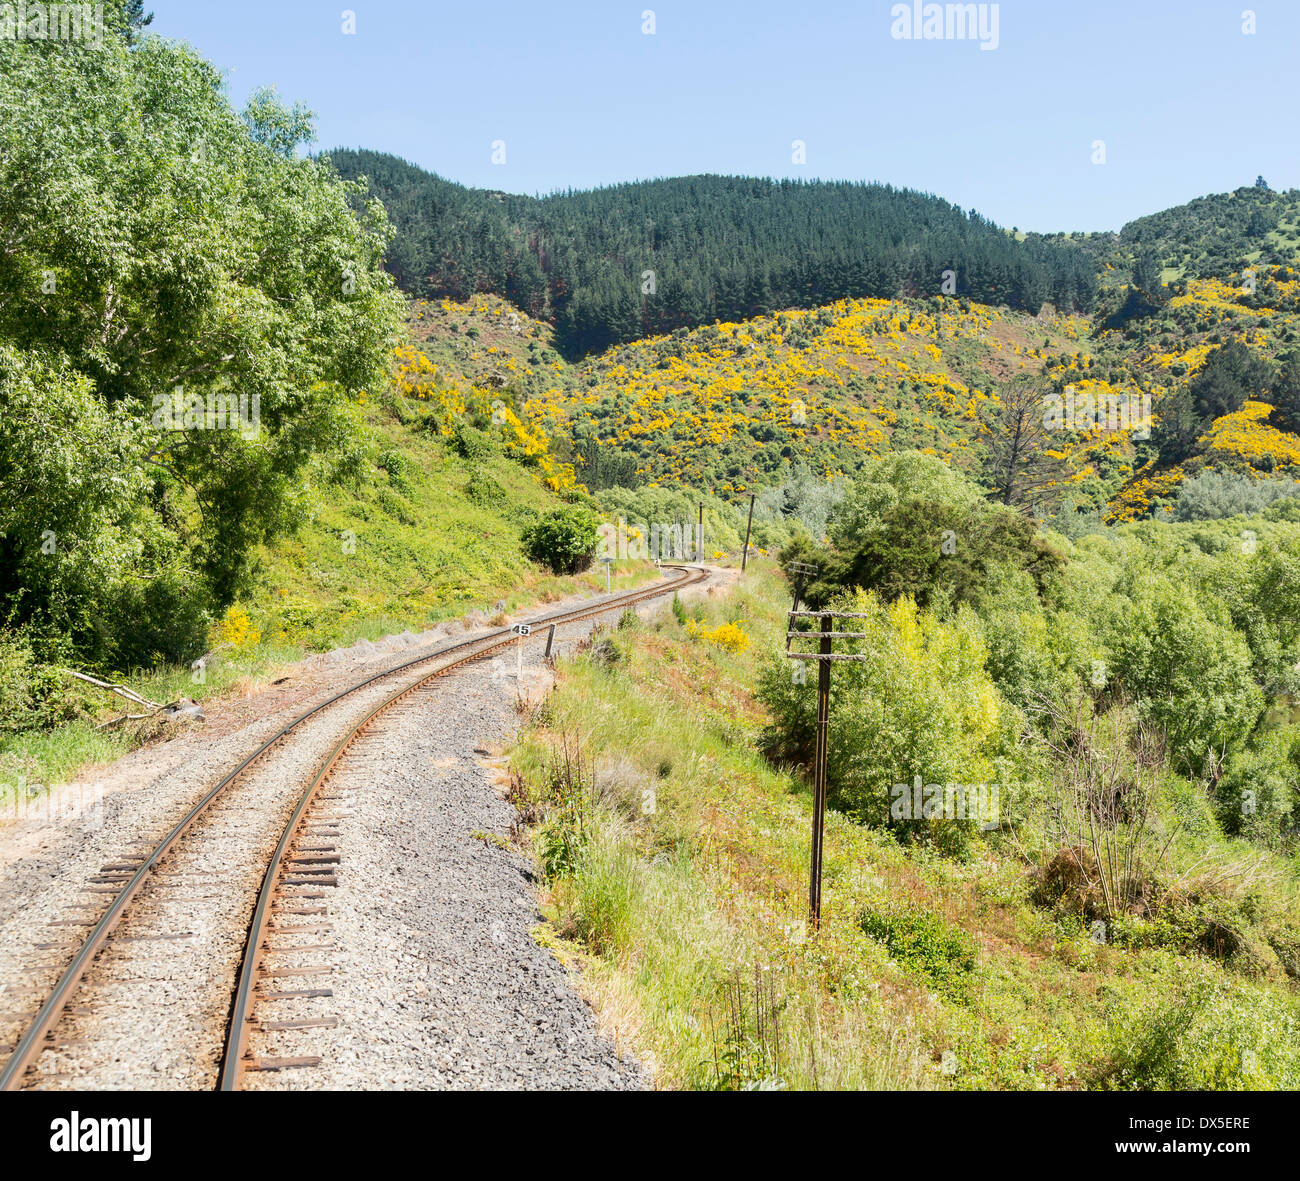 Railway track of Taieri Gorge tourist railway track curves through the forest on its journey up the valley, New Zealand Stock Photo